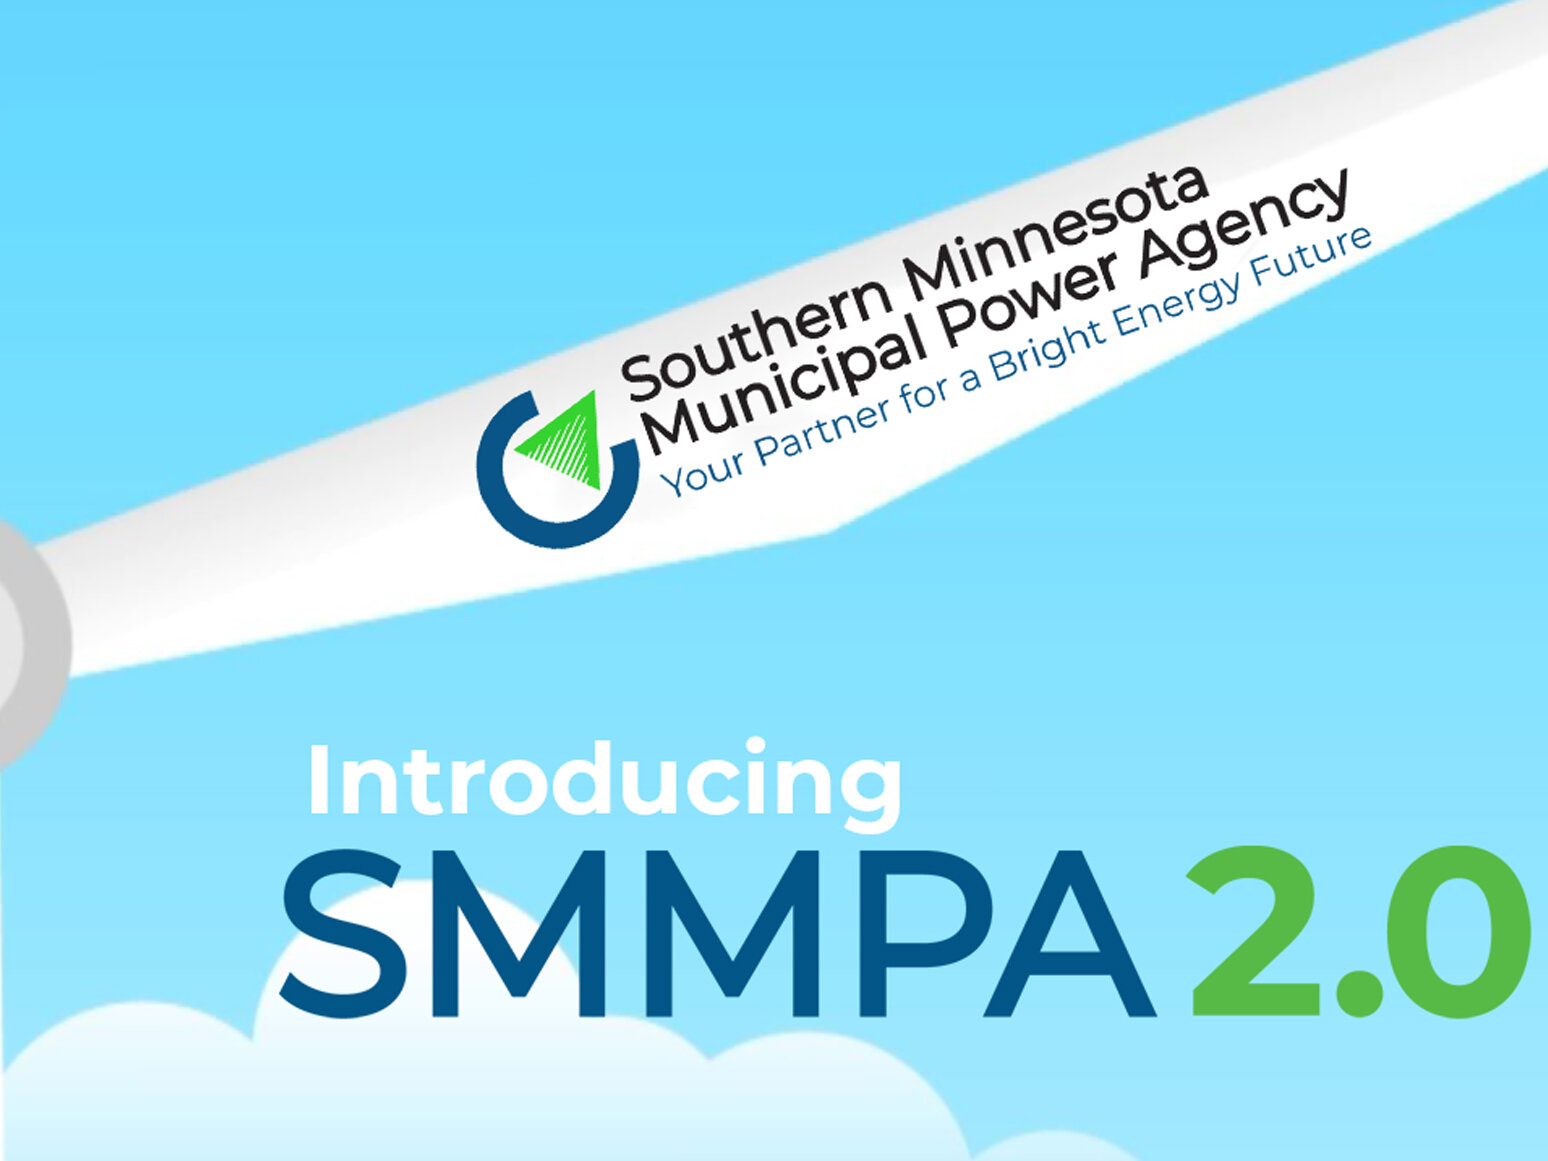 "Introducing SMMPA 2.0" (30 seconds)